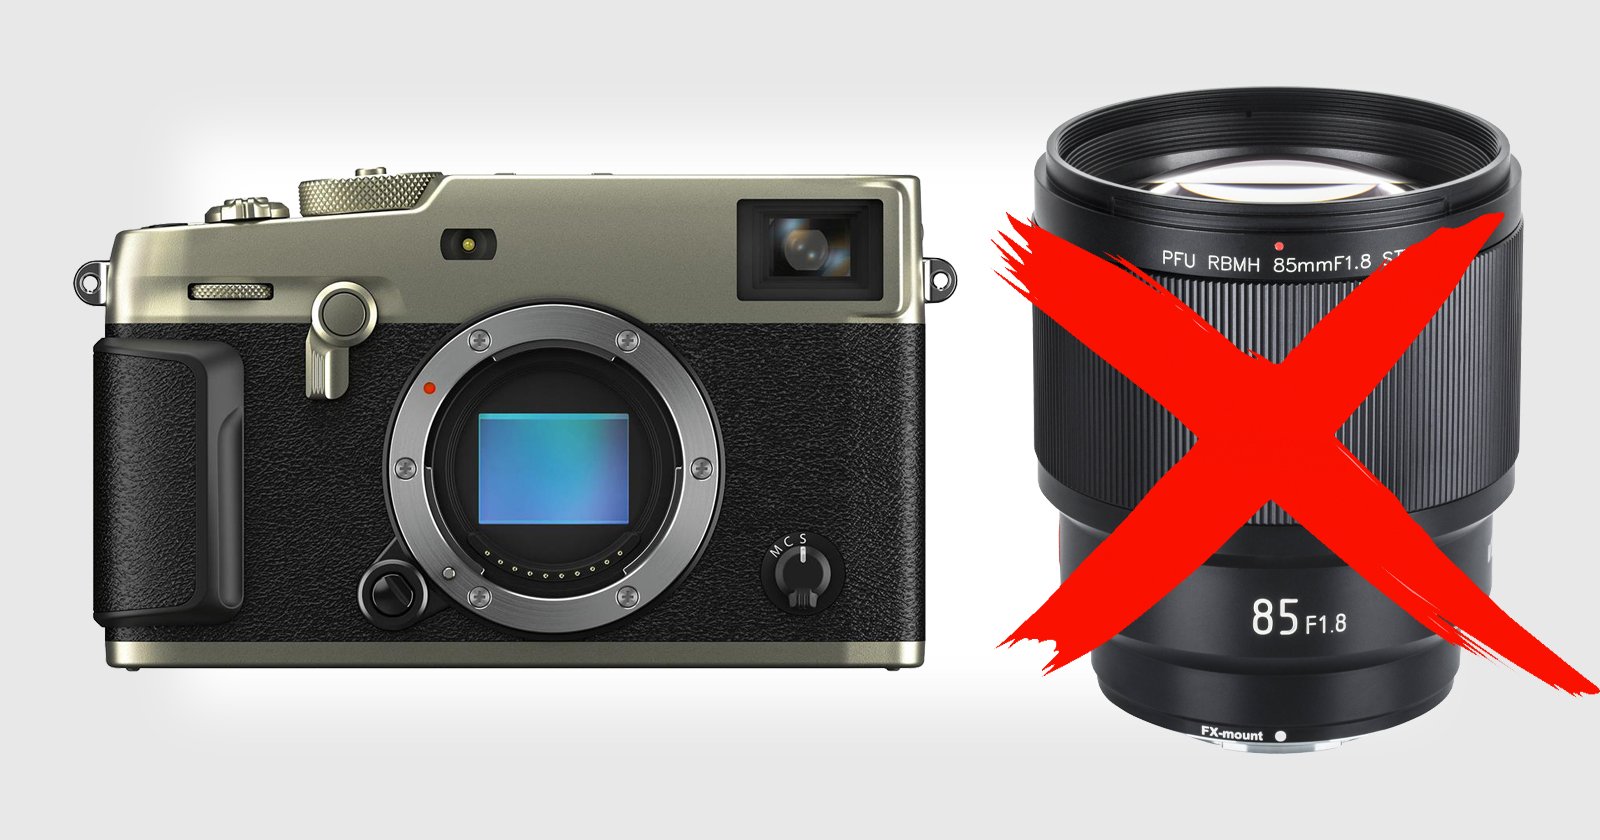 Viltrox Warns that Some of Its Lenses Can Damage the Fuji X-Pro3